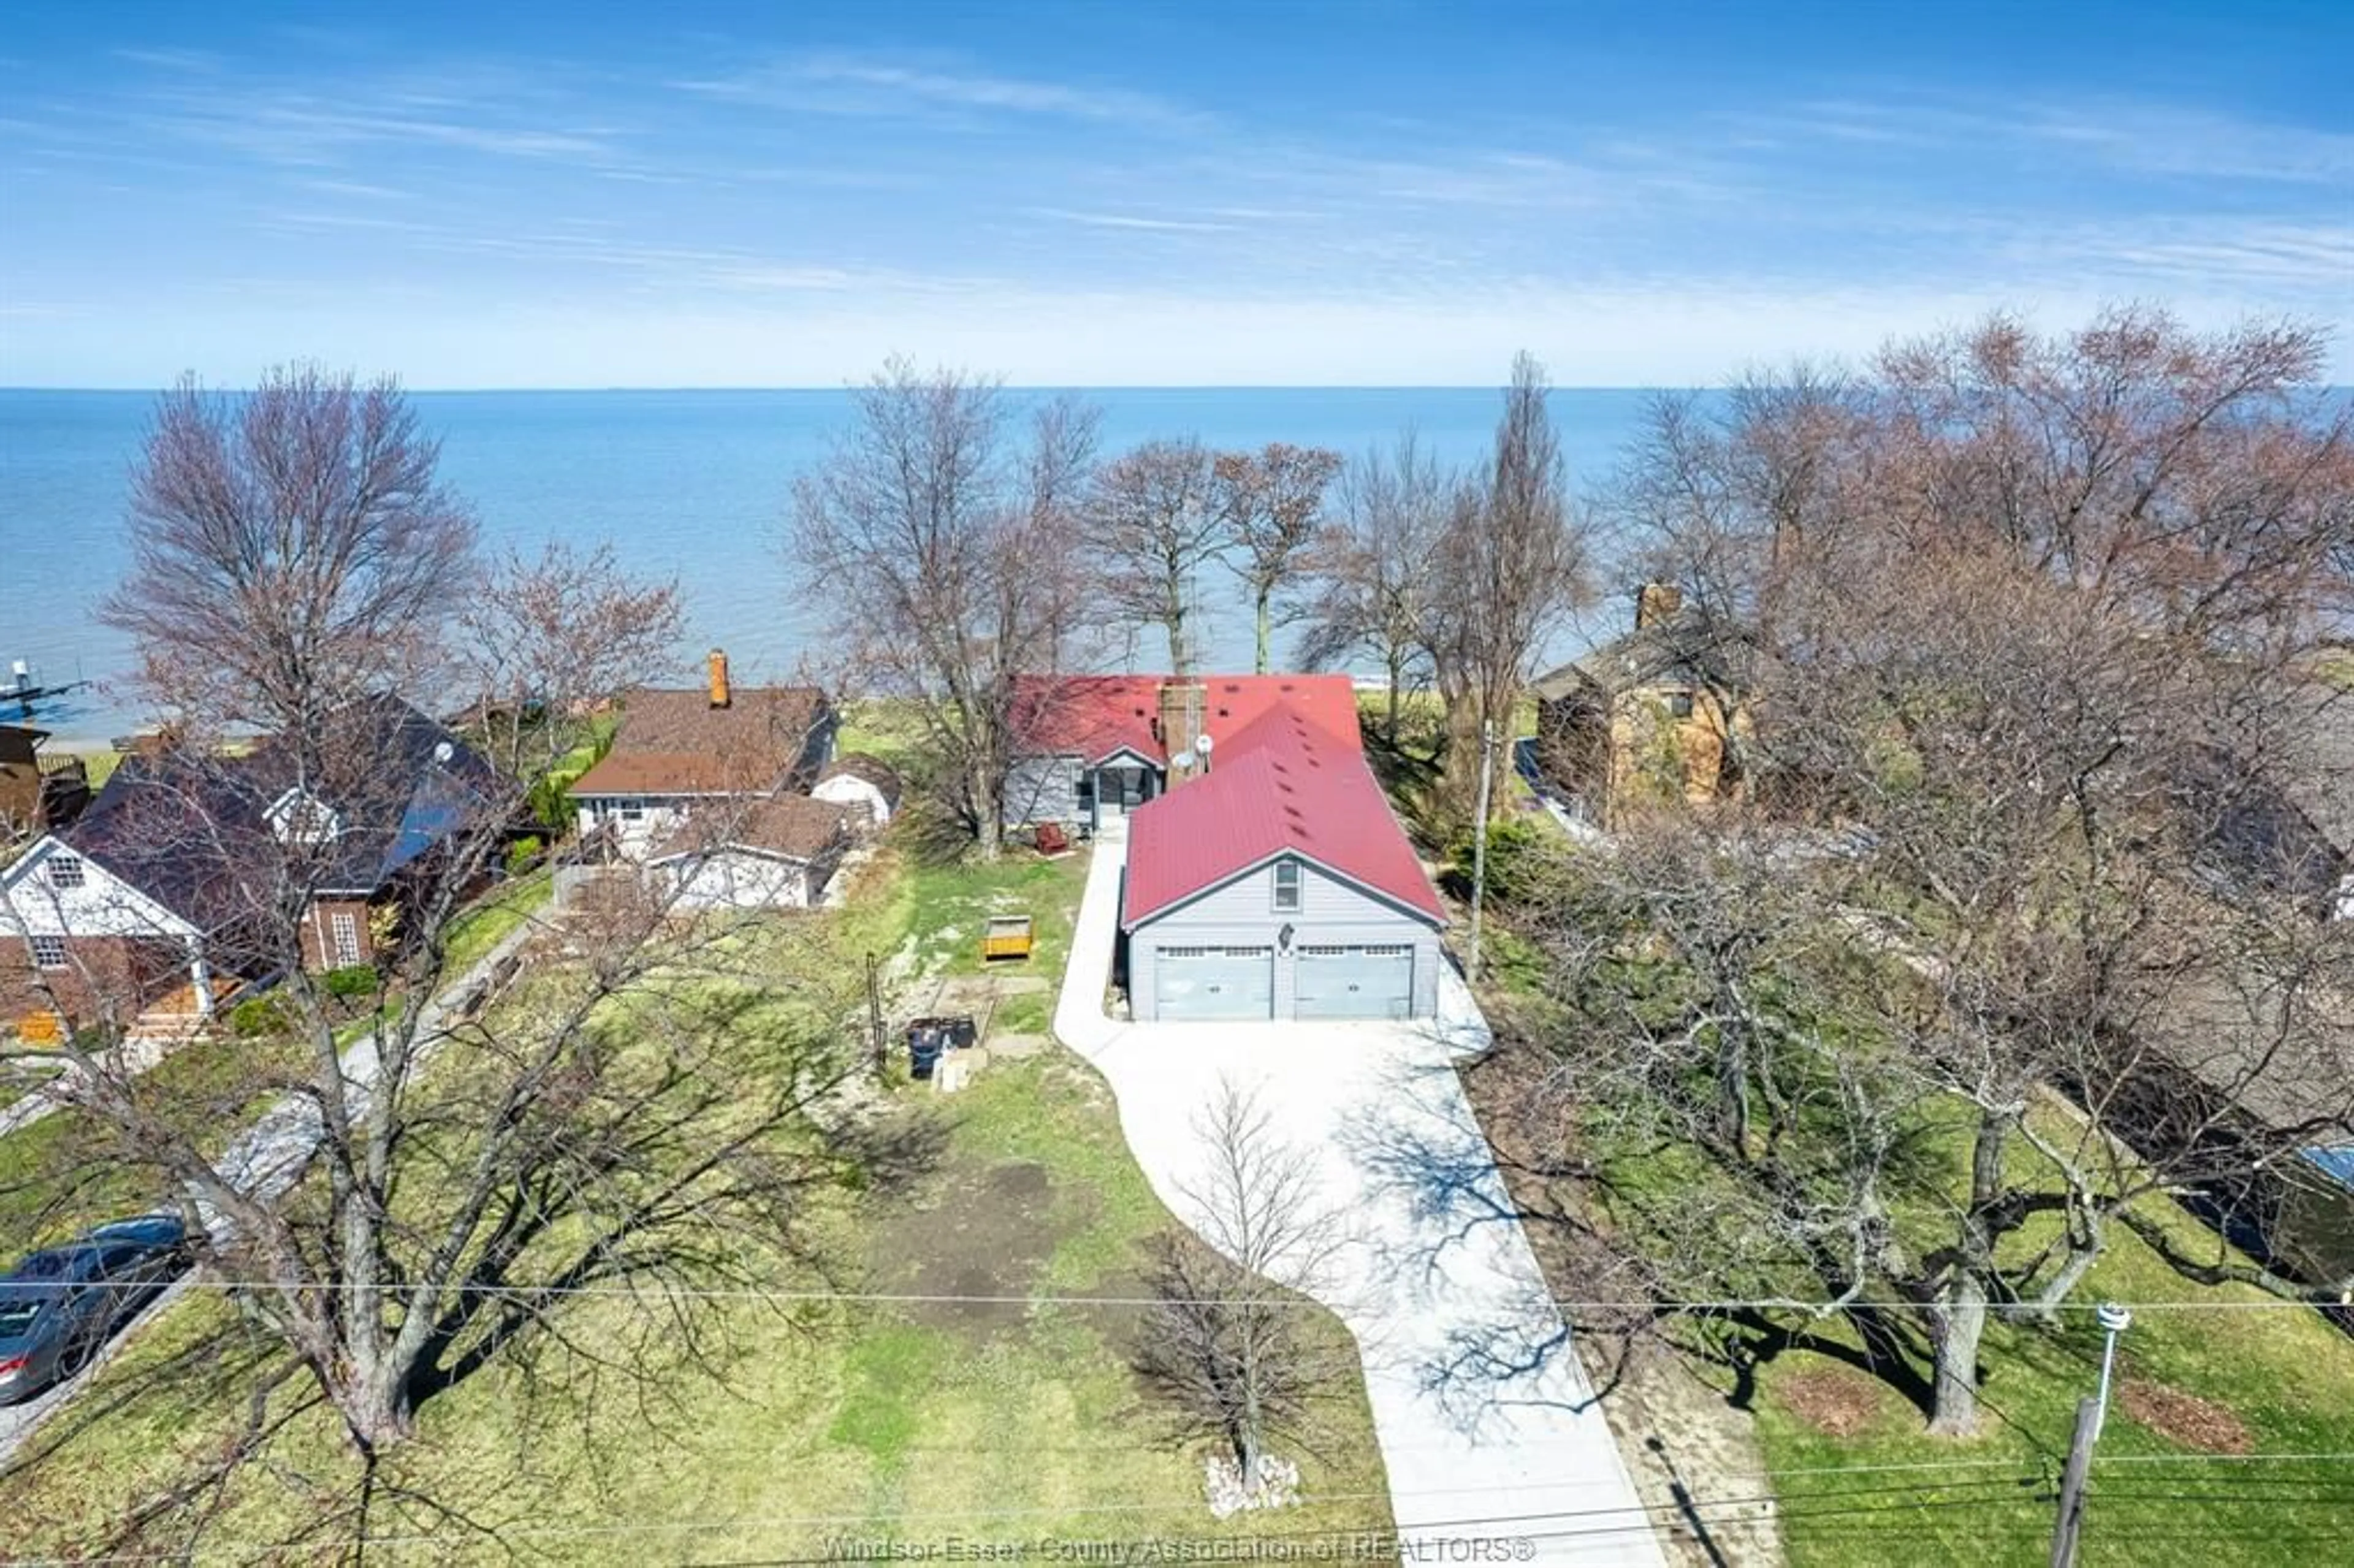 Lakeview for 5058 ST. CLAIR Rd, Lakeshore Ontario N0R 1N0